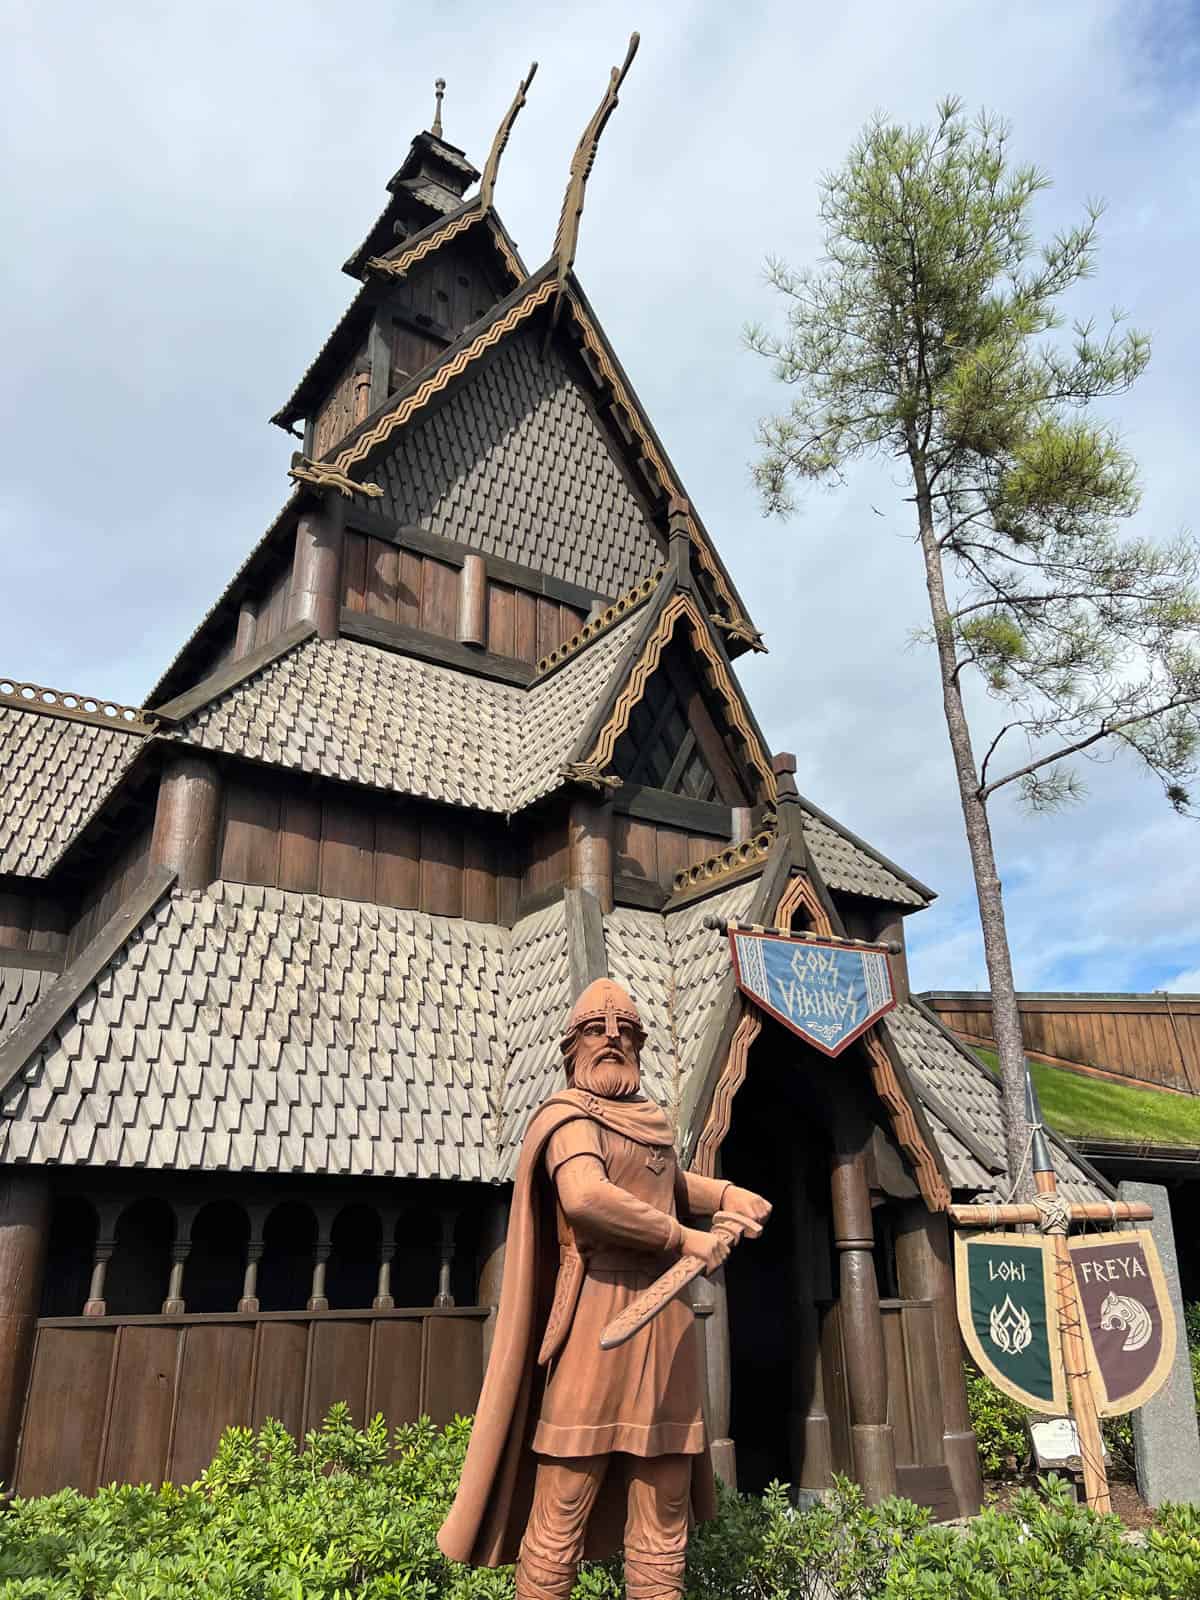 A wooden stave church replica at Epcot.